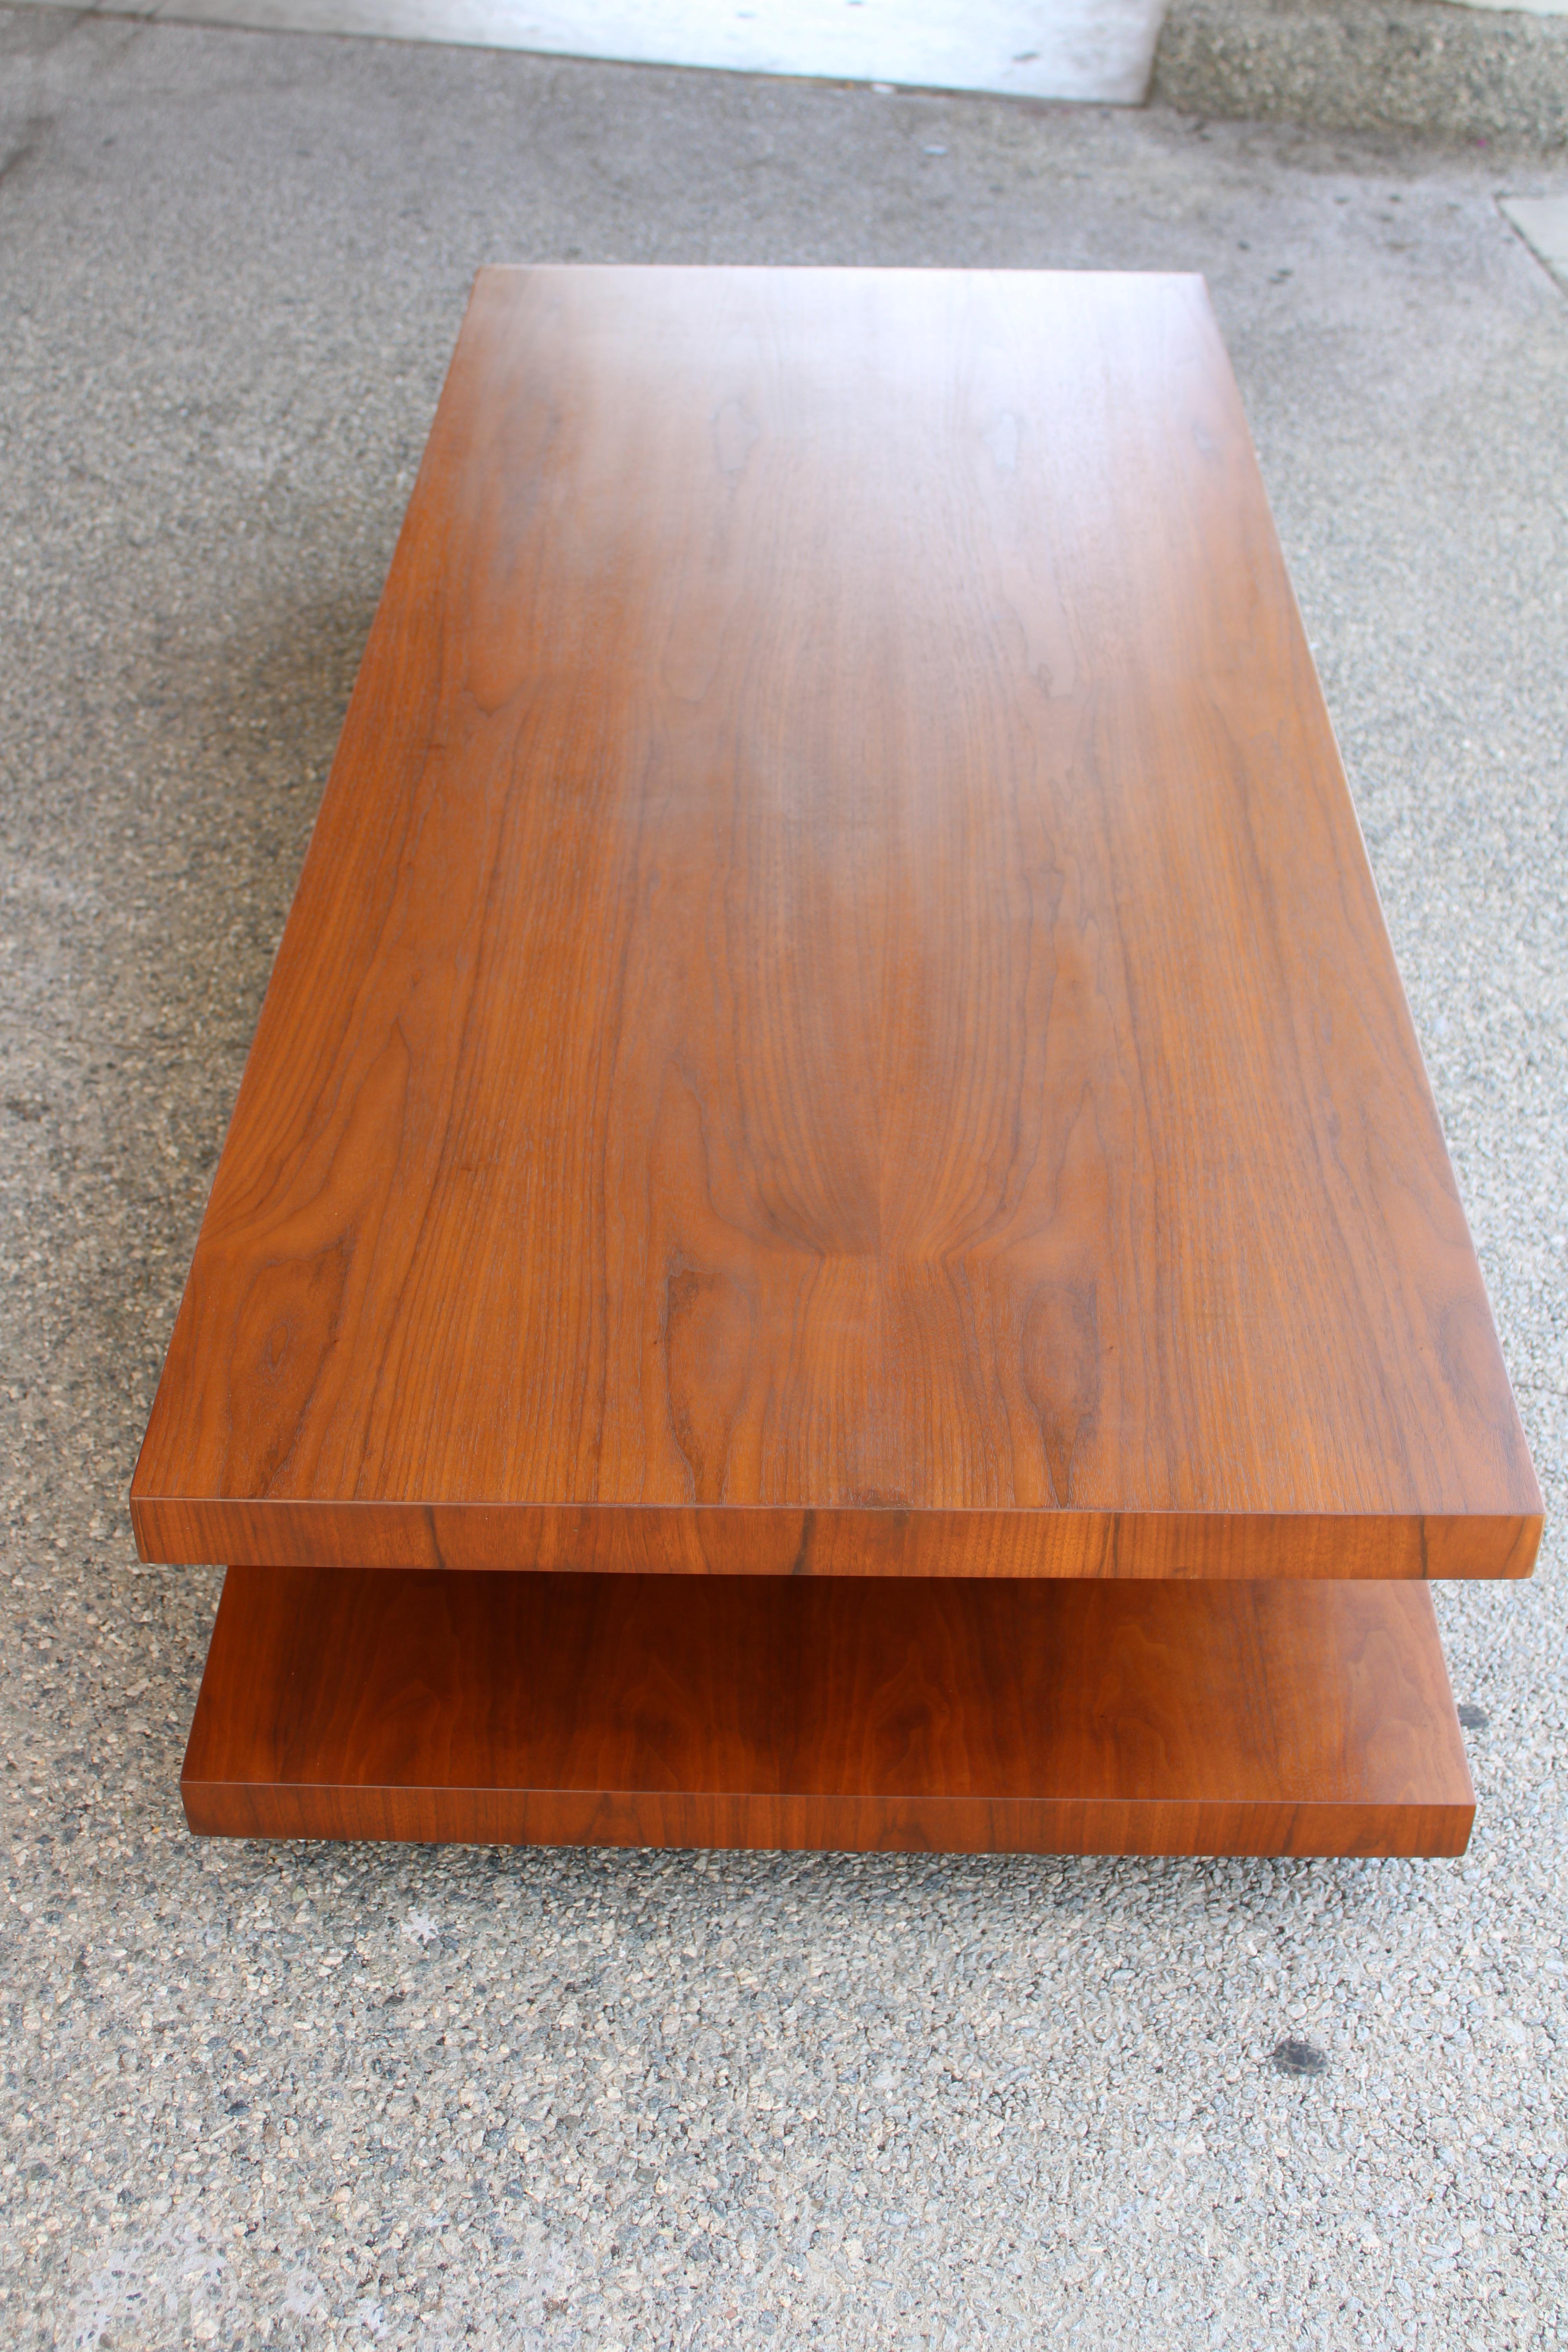 Mid-Century Modern Two Tier Coffee Table on Rollers, style of Van Keppel Green (VKG), Glass Top For Sale